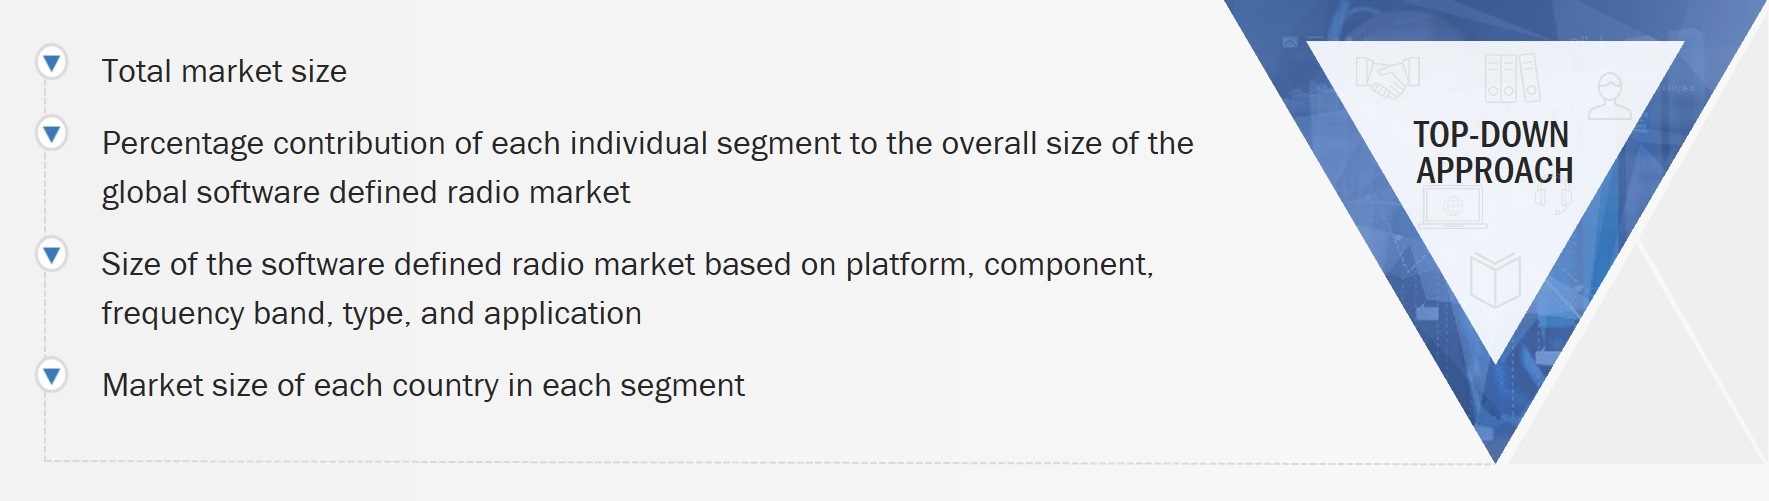 Software Defined Radio Market Size, and Top- Down approach 